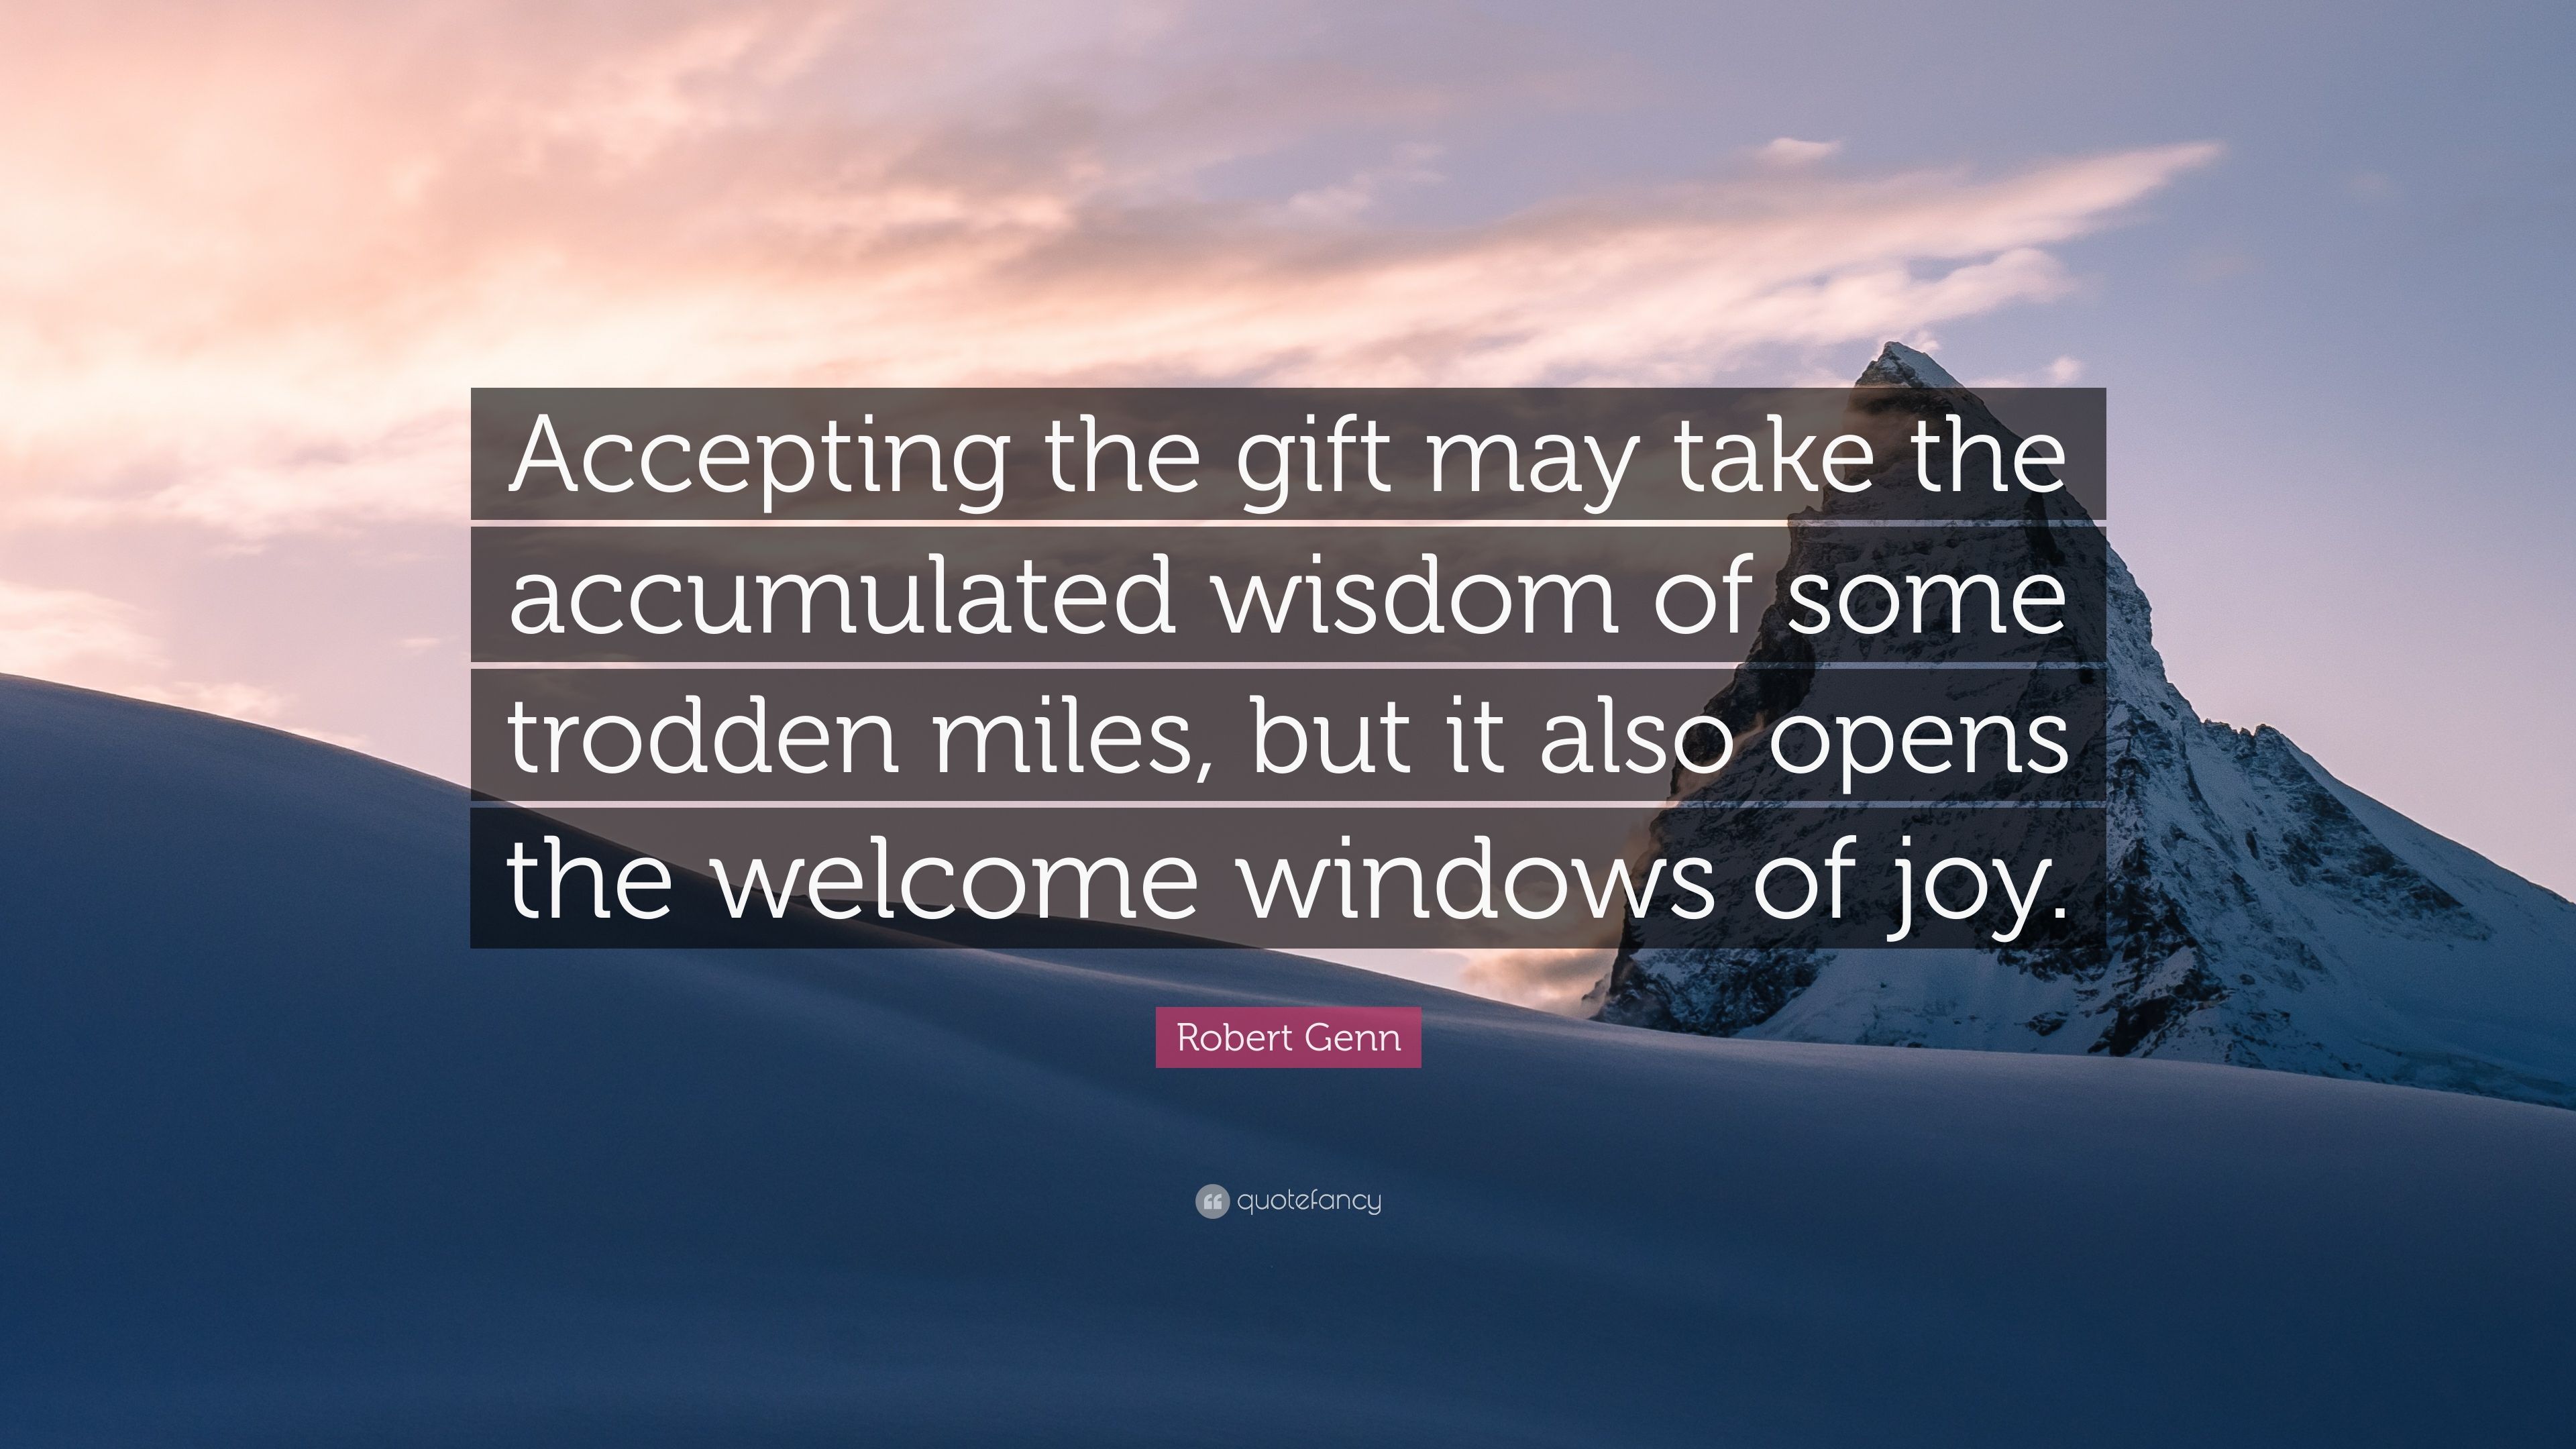 Robert Genn Quote: “Accepting the gift may take the accumulated ...